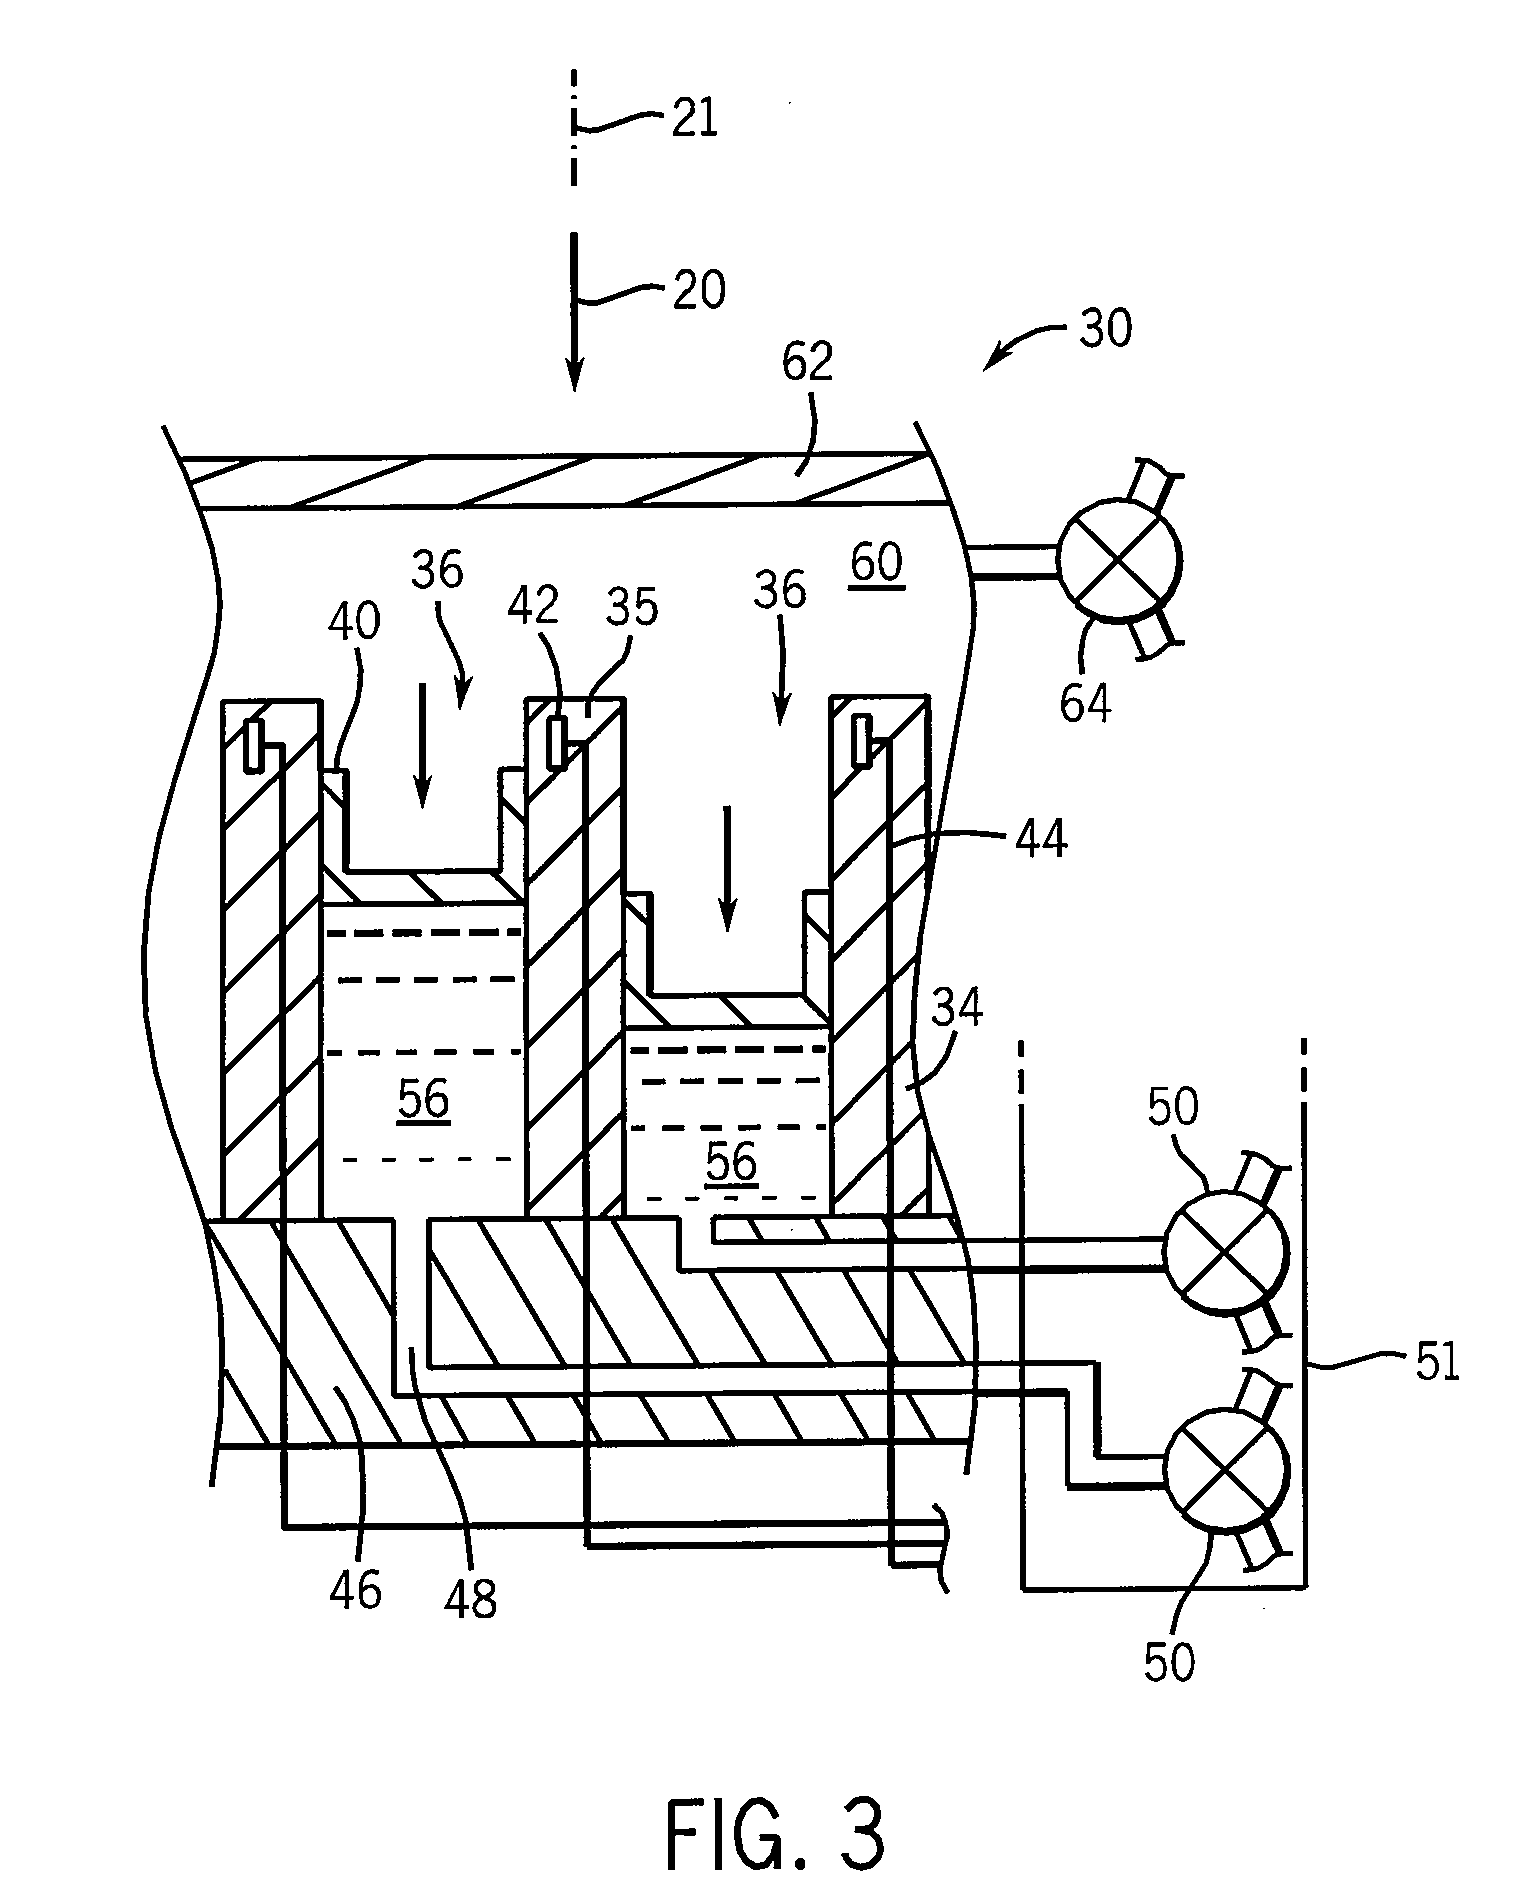 Areal modulator for intensity modulated radiation therapy